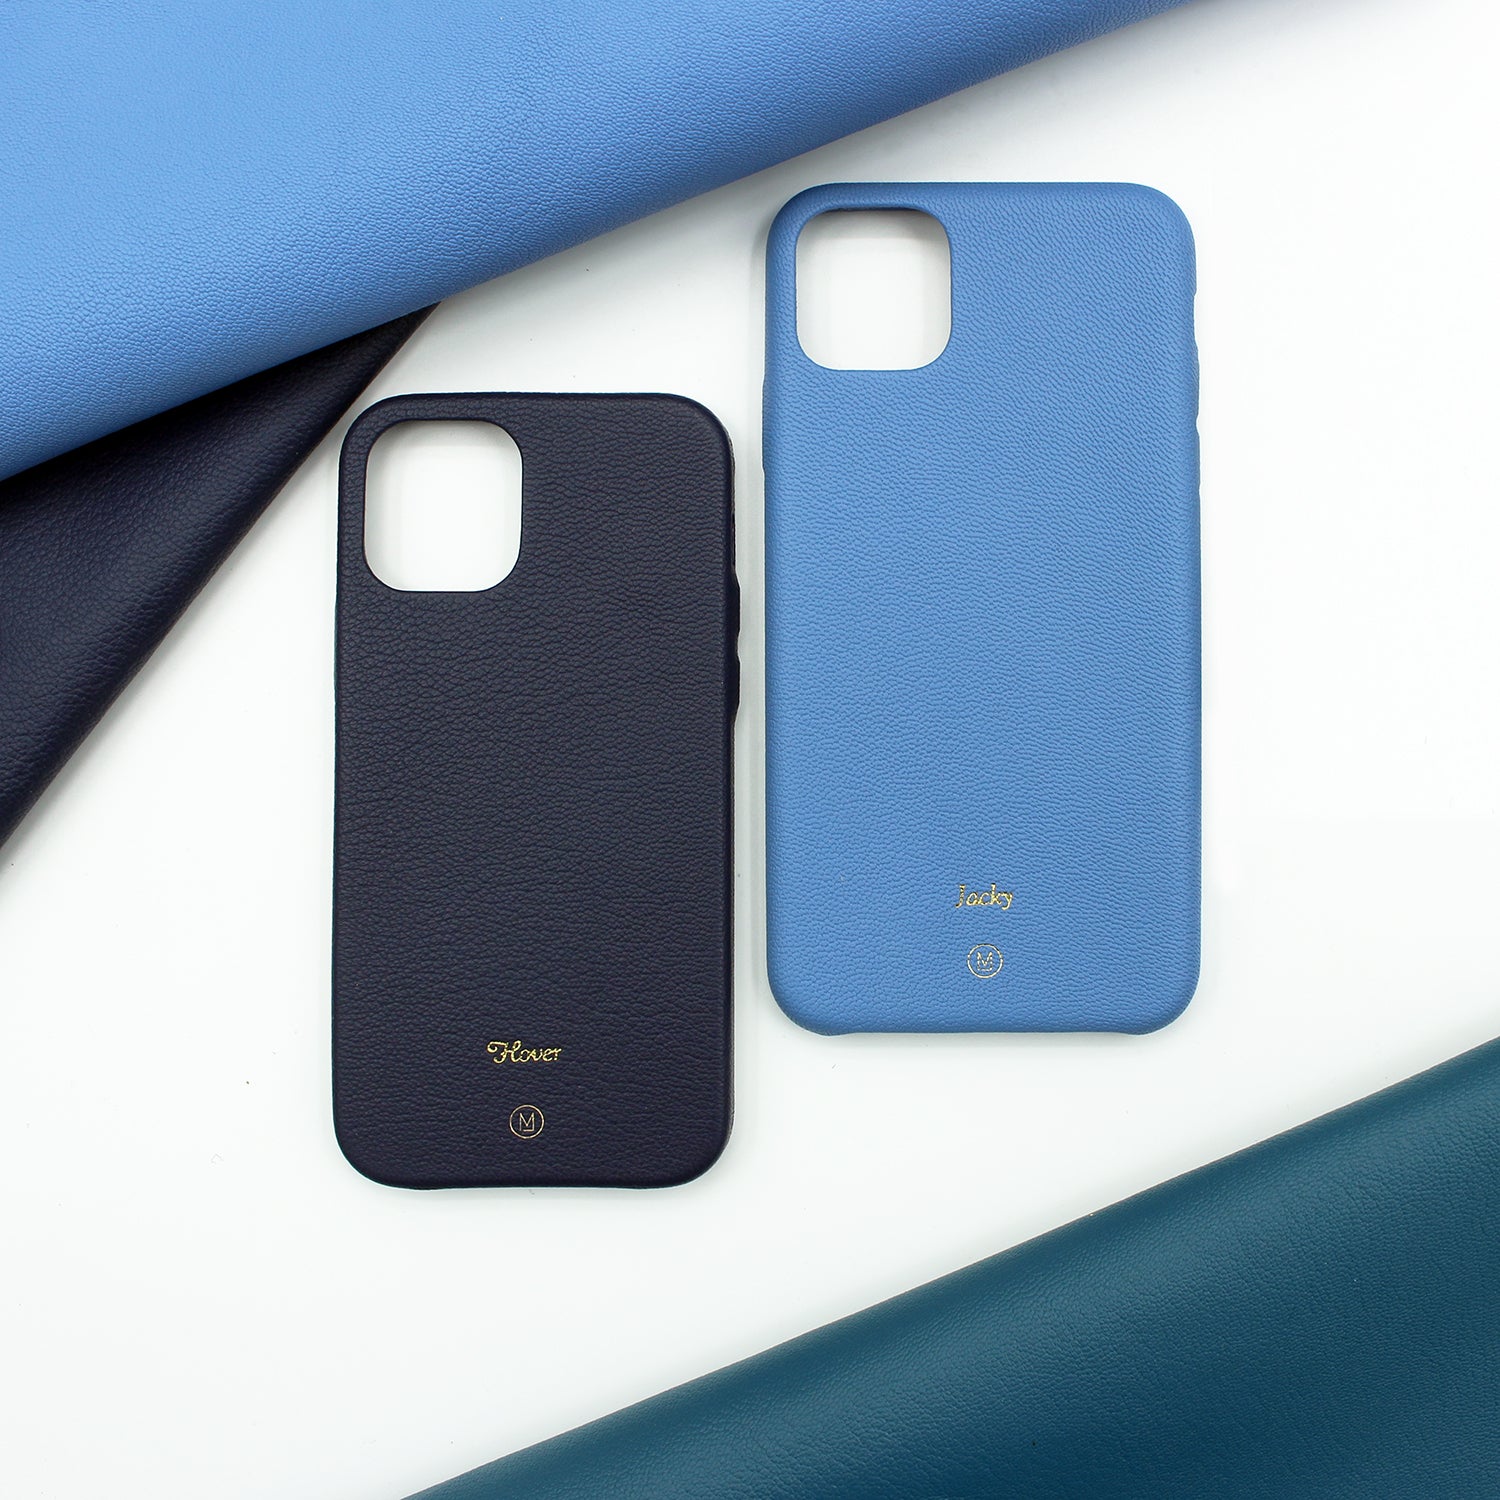 iPhone Case Bundle which includes 2 leather iPhone cases, at 15% off the original price. Different hues of blue are available. Complimentary embossing and international shipping. 